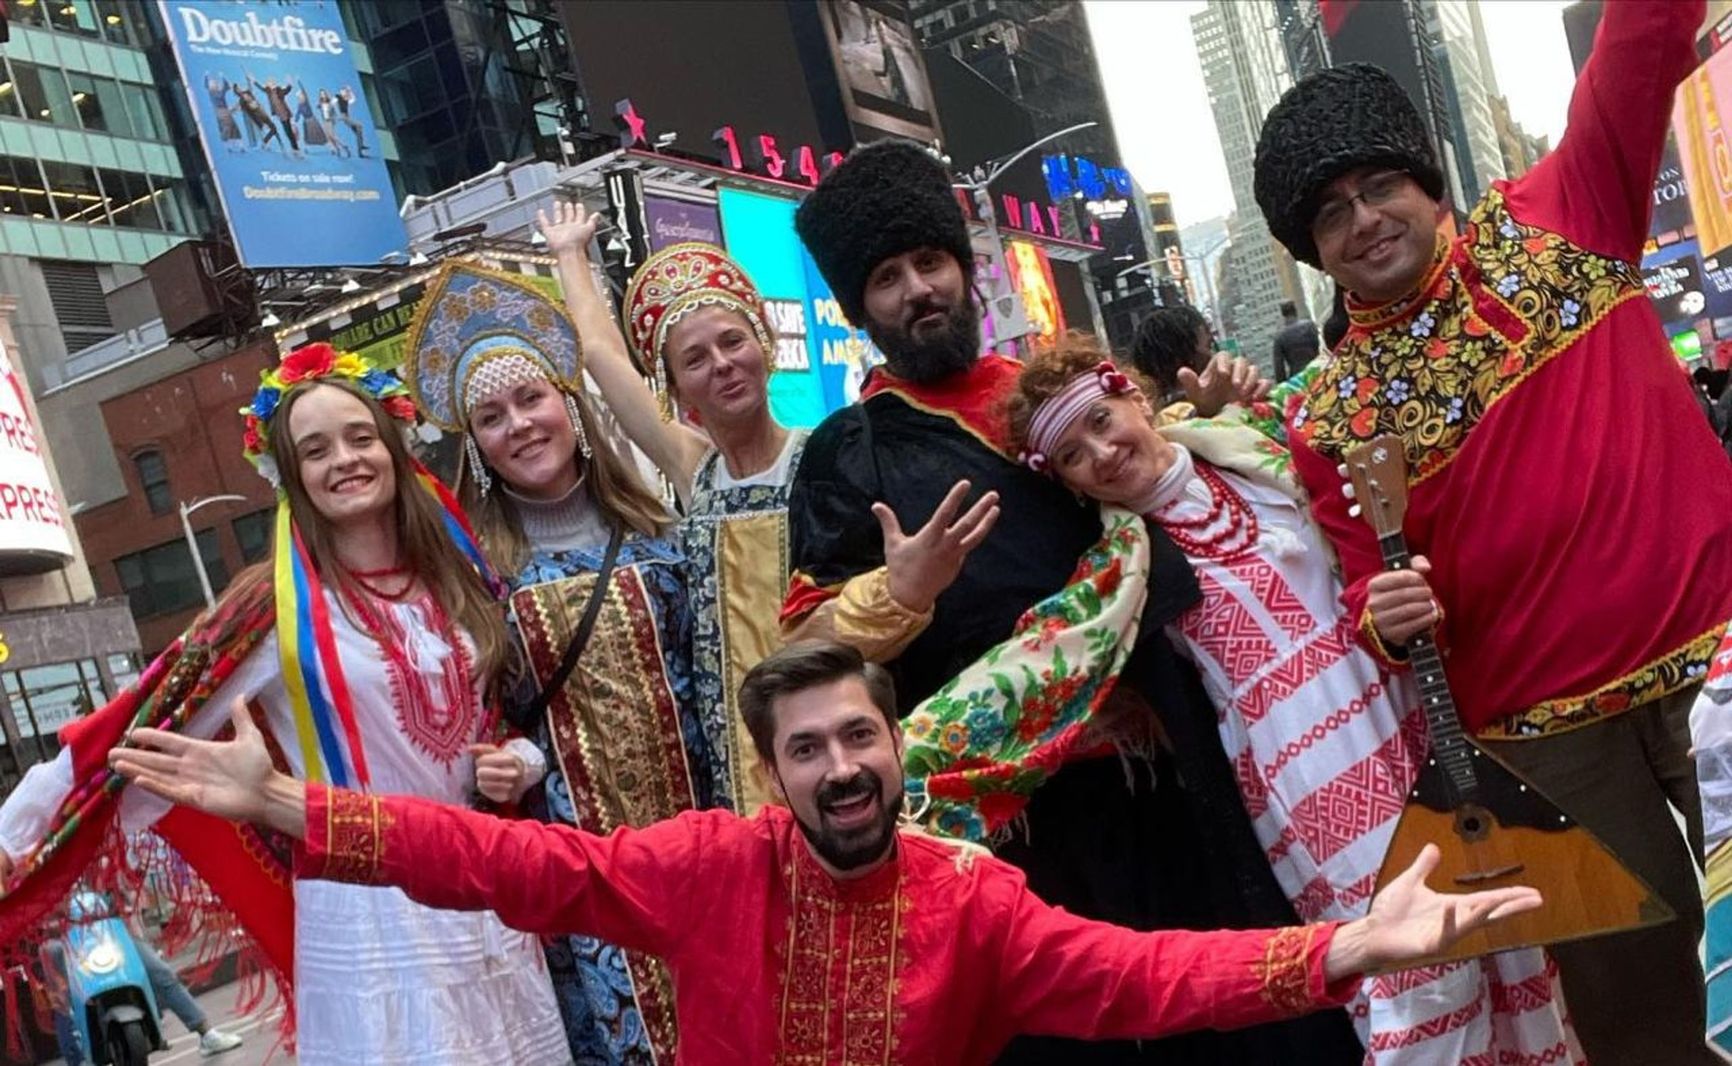 “Russian Youth of America” at a rally to celebrate National Unity Day in Times Square, November 2021. Igor Kochan wears a red shirt and a beard